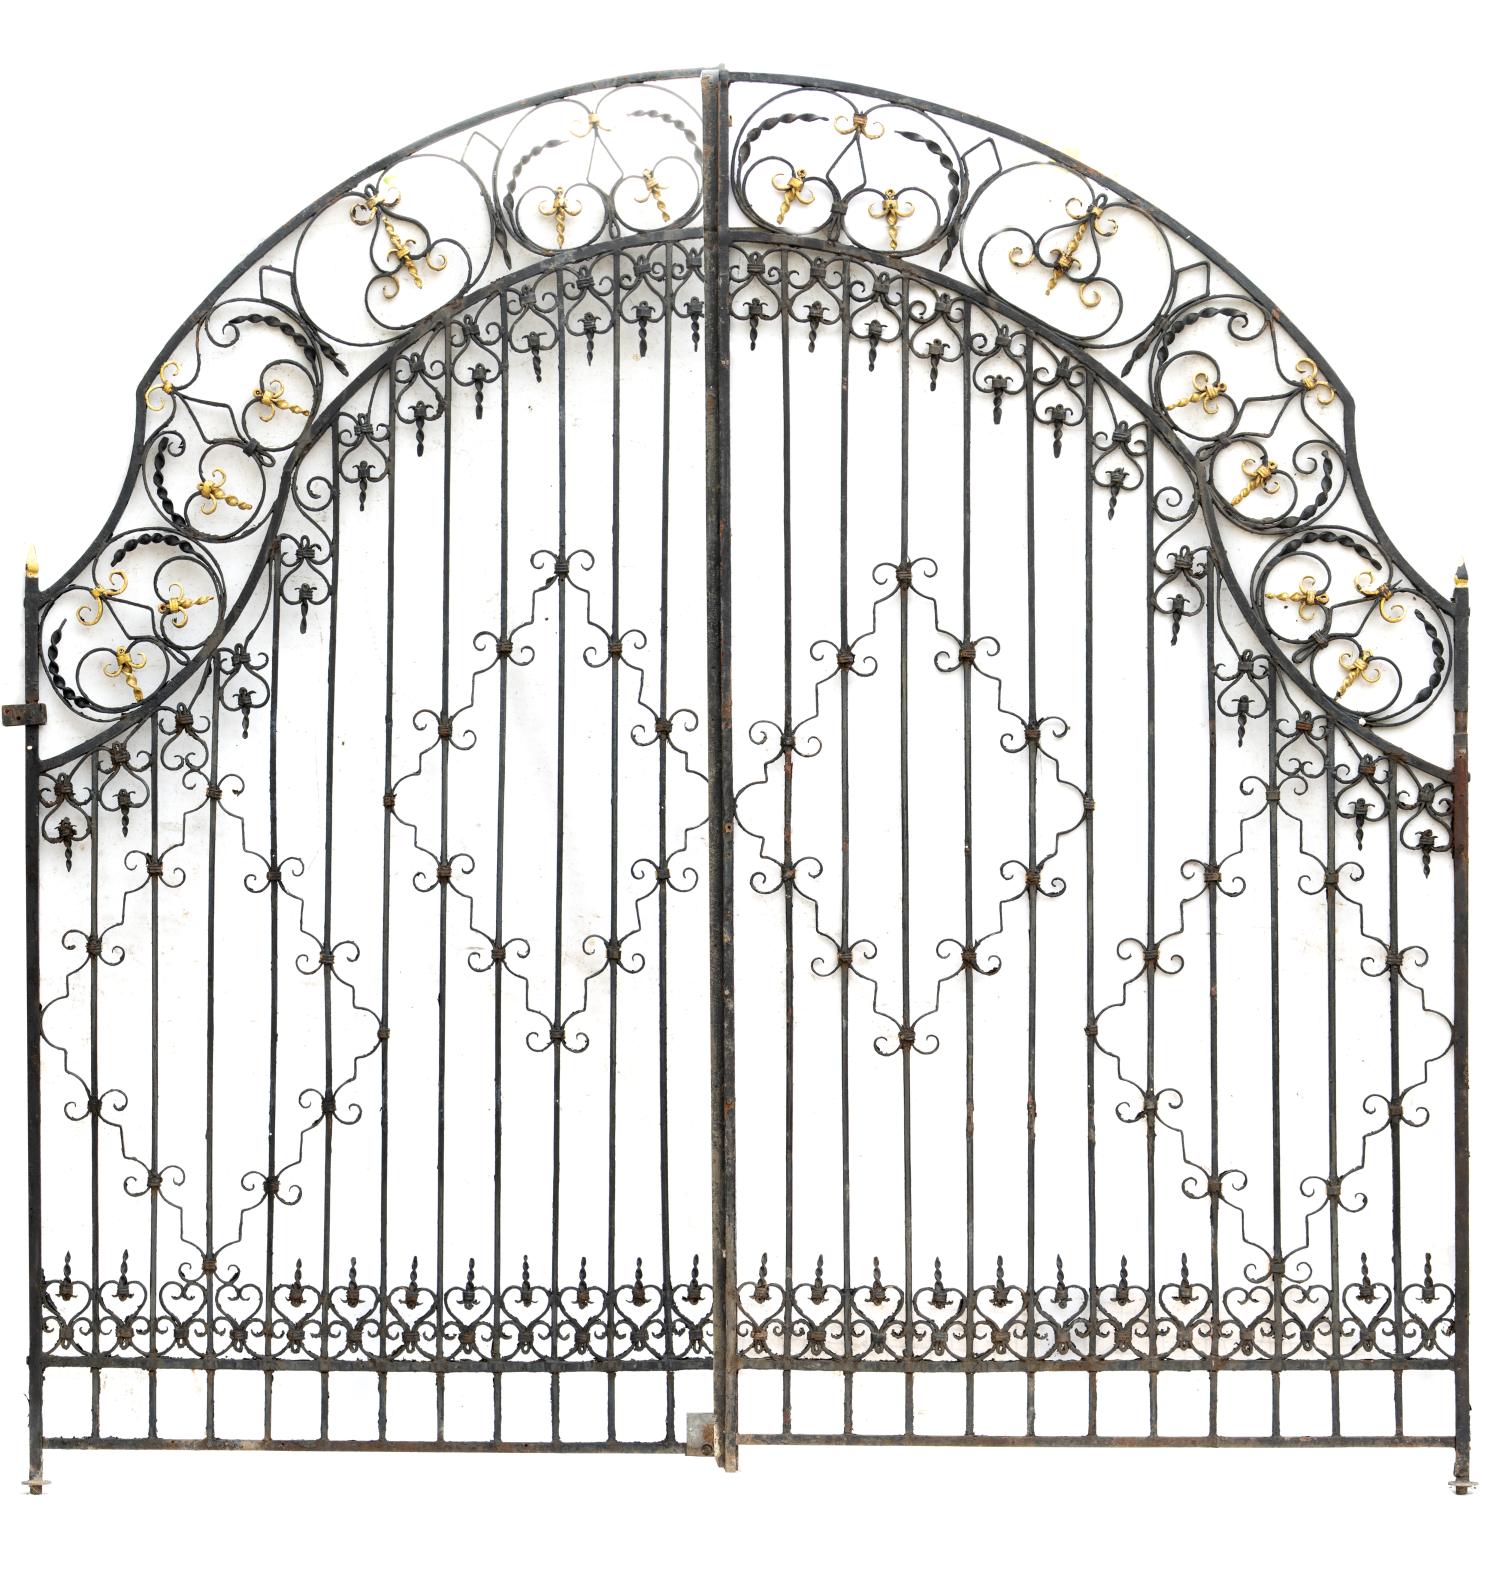 Architectural: † A pair of wrought iron gatesearly 20th century334cm high by 348cm wide